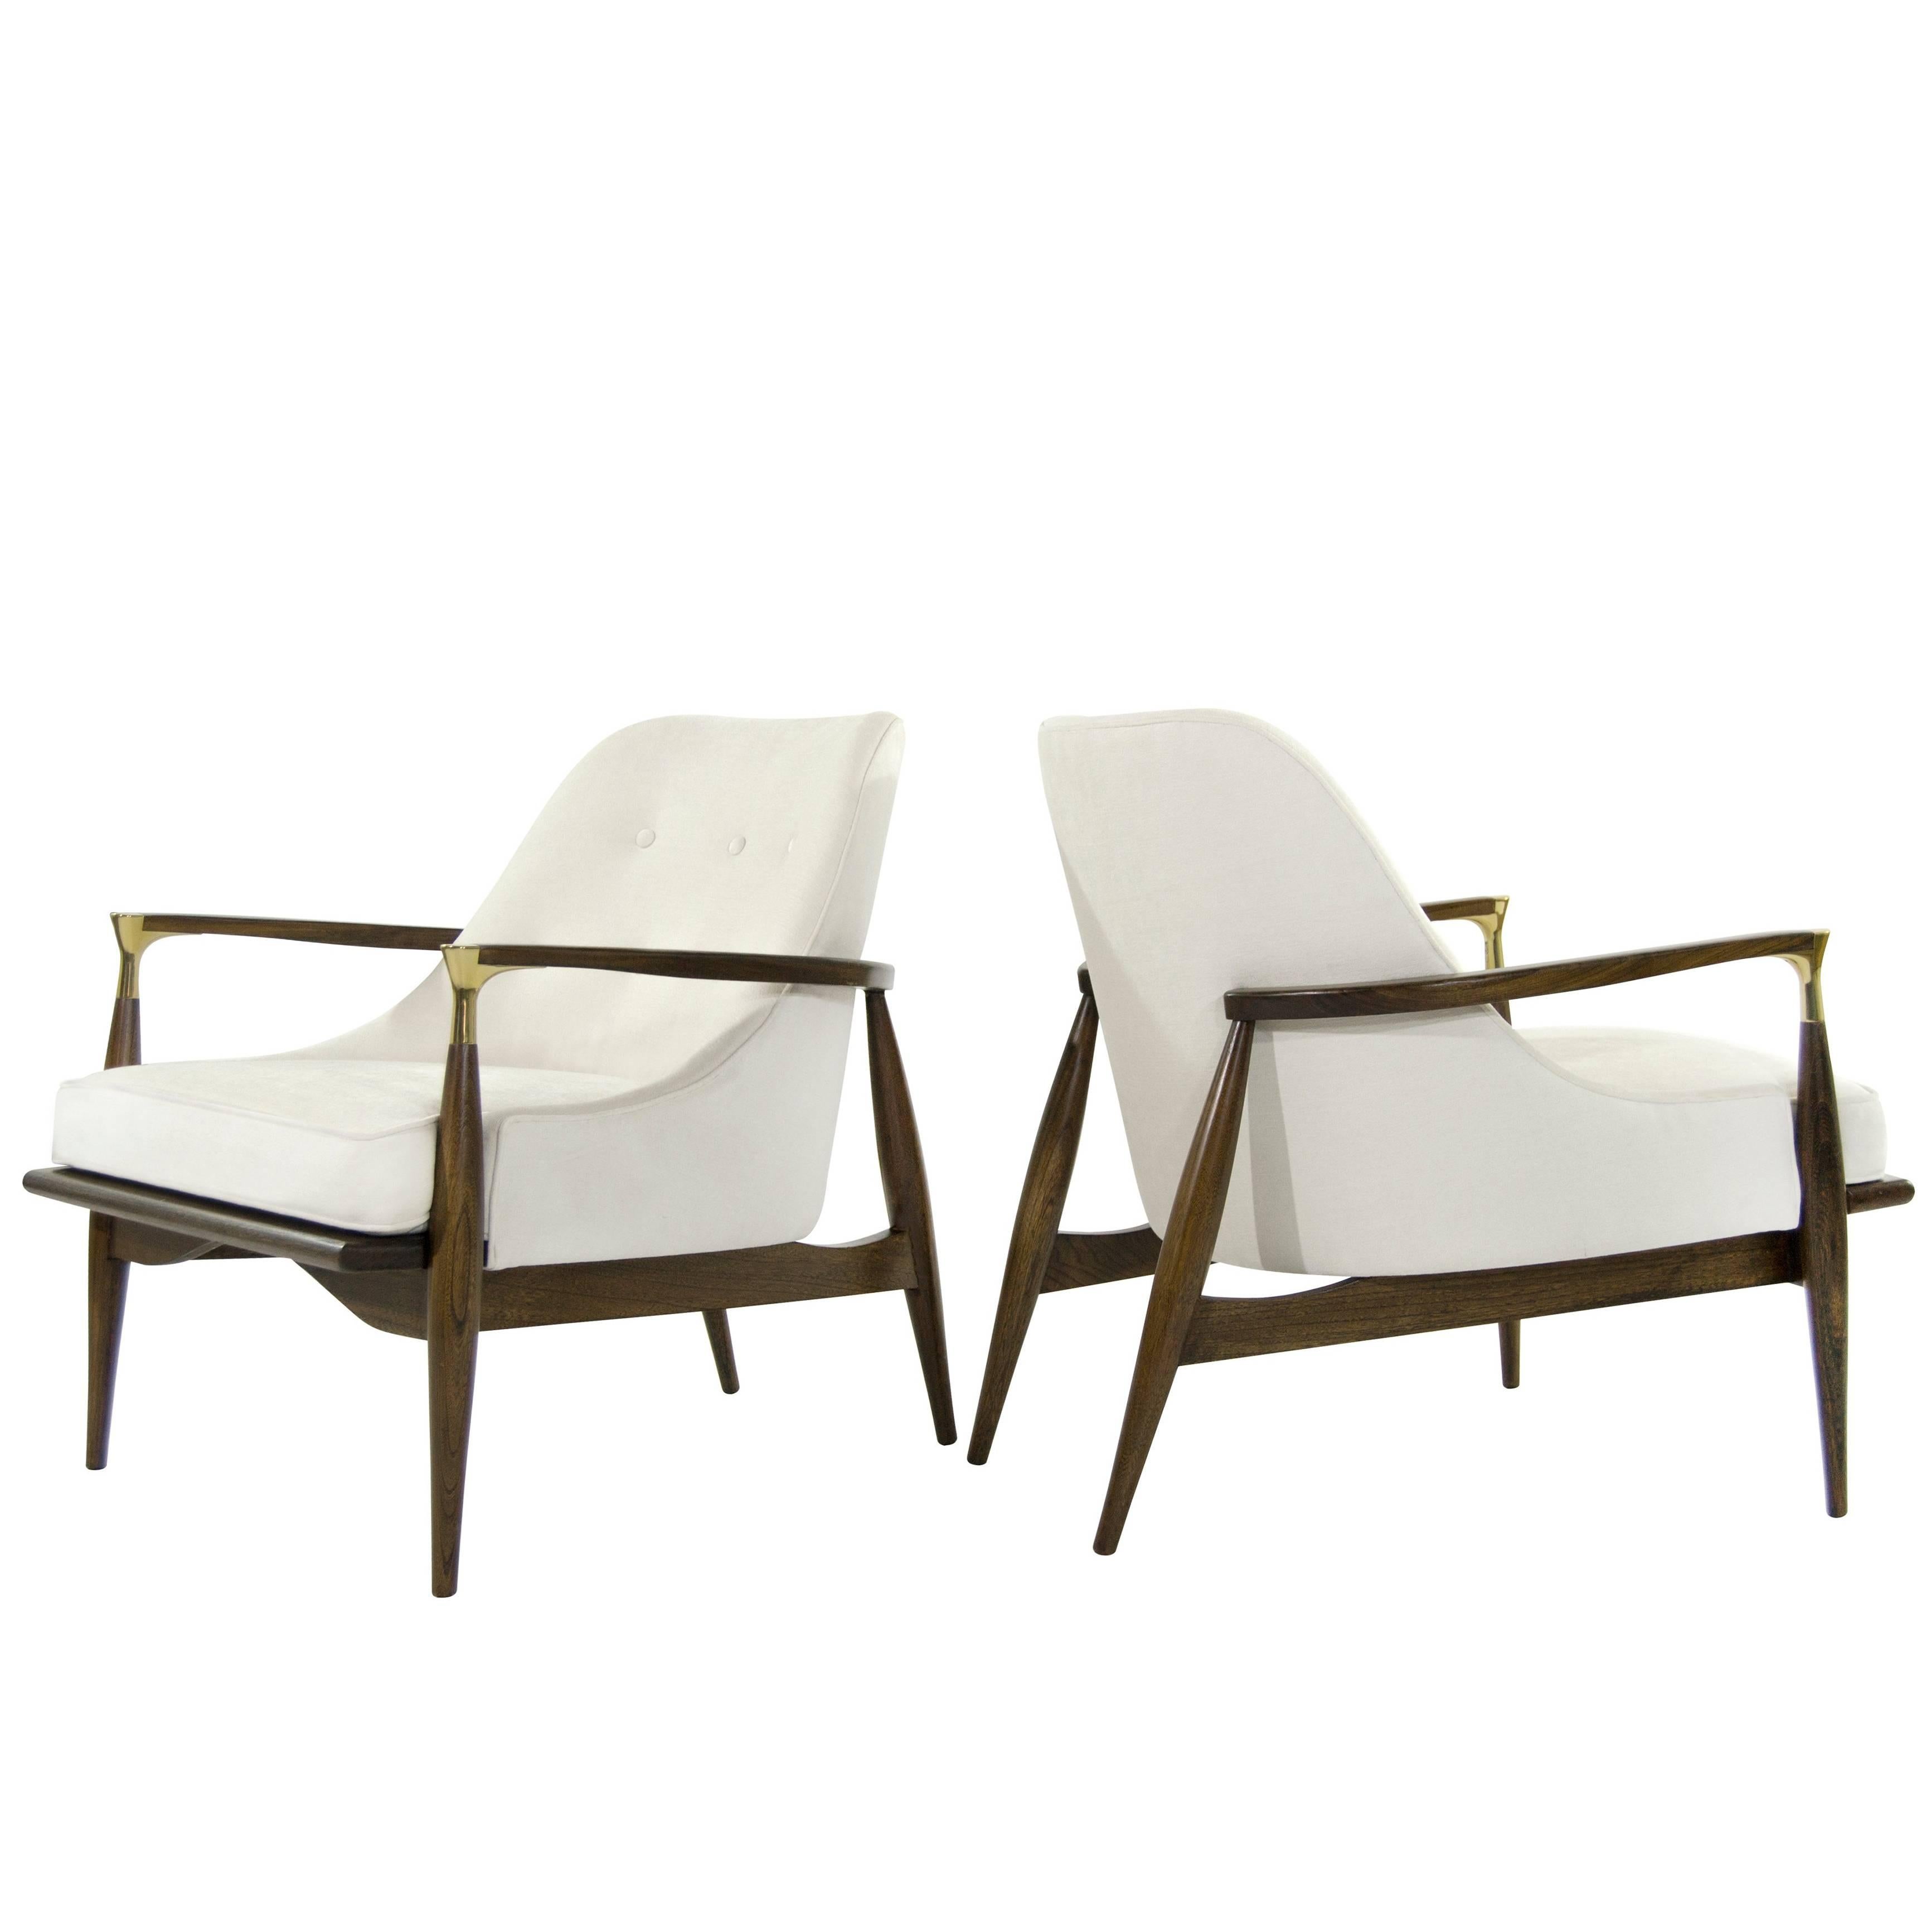 Rare lounge chairs in the style of Ib Kofod-Larsen. Featuring brass details on arms. Newly upholstered in soft off-white wool. Sculptural walnut frames completely restored. Set of 4 available. Priced individually.